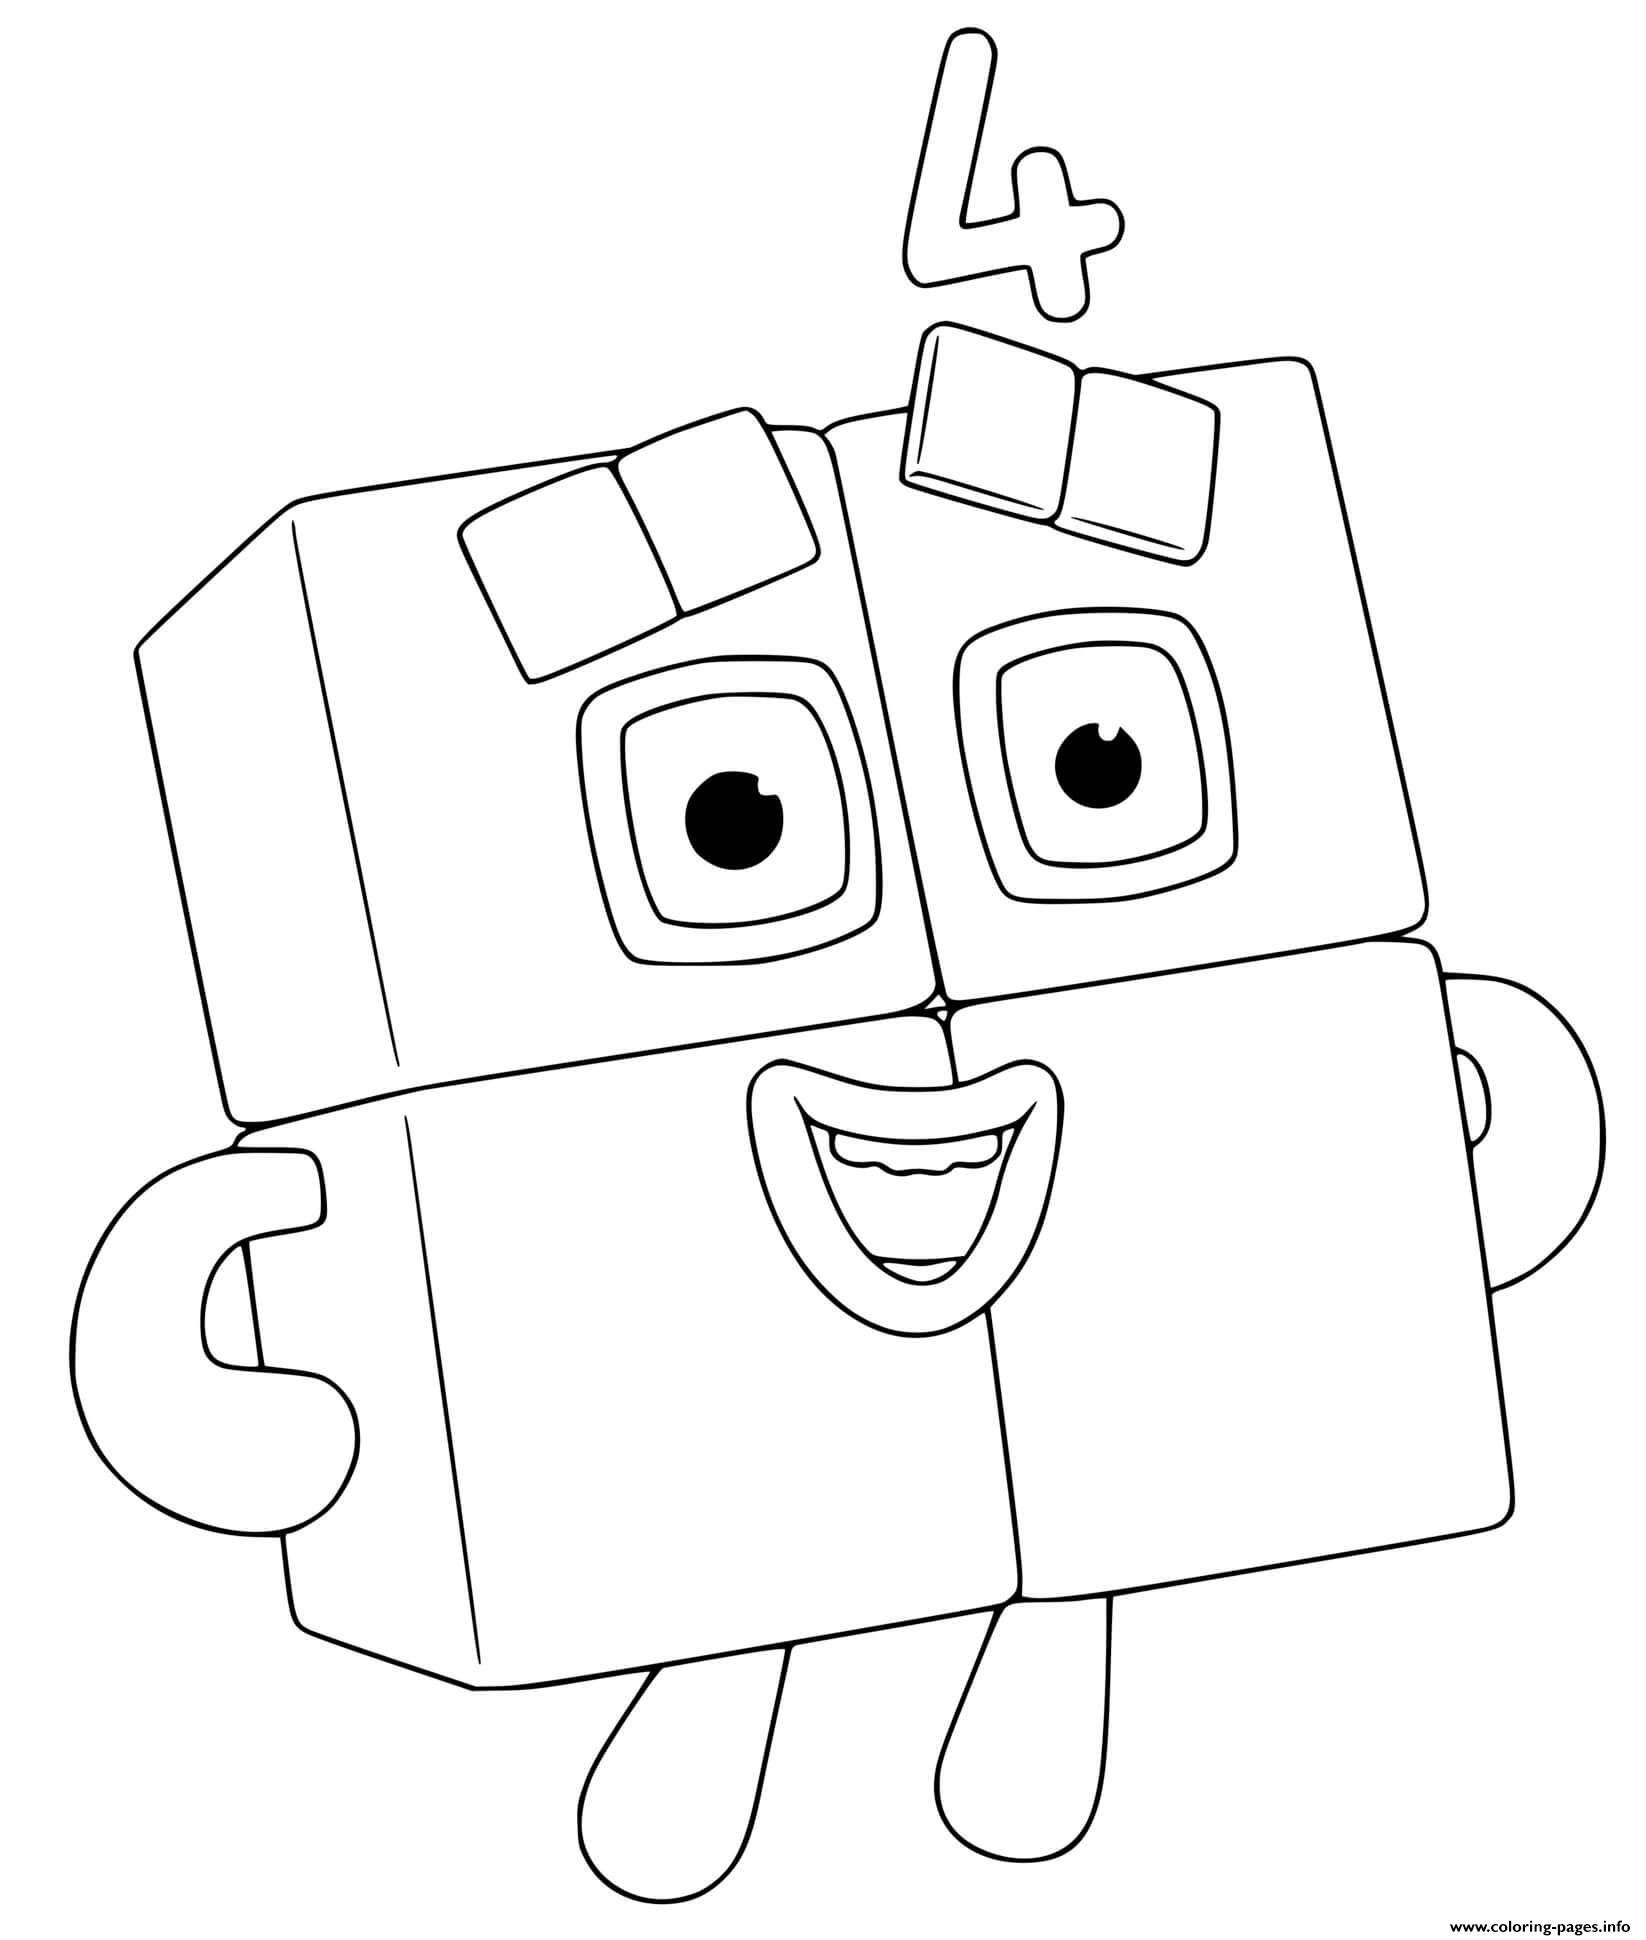 Printable Numberblocks Coloring Pages - Printable Word Searches